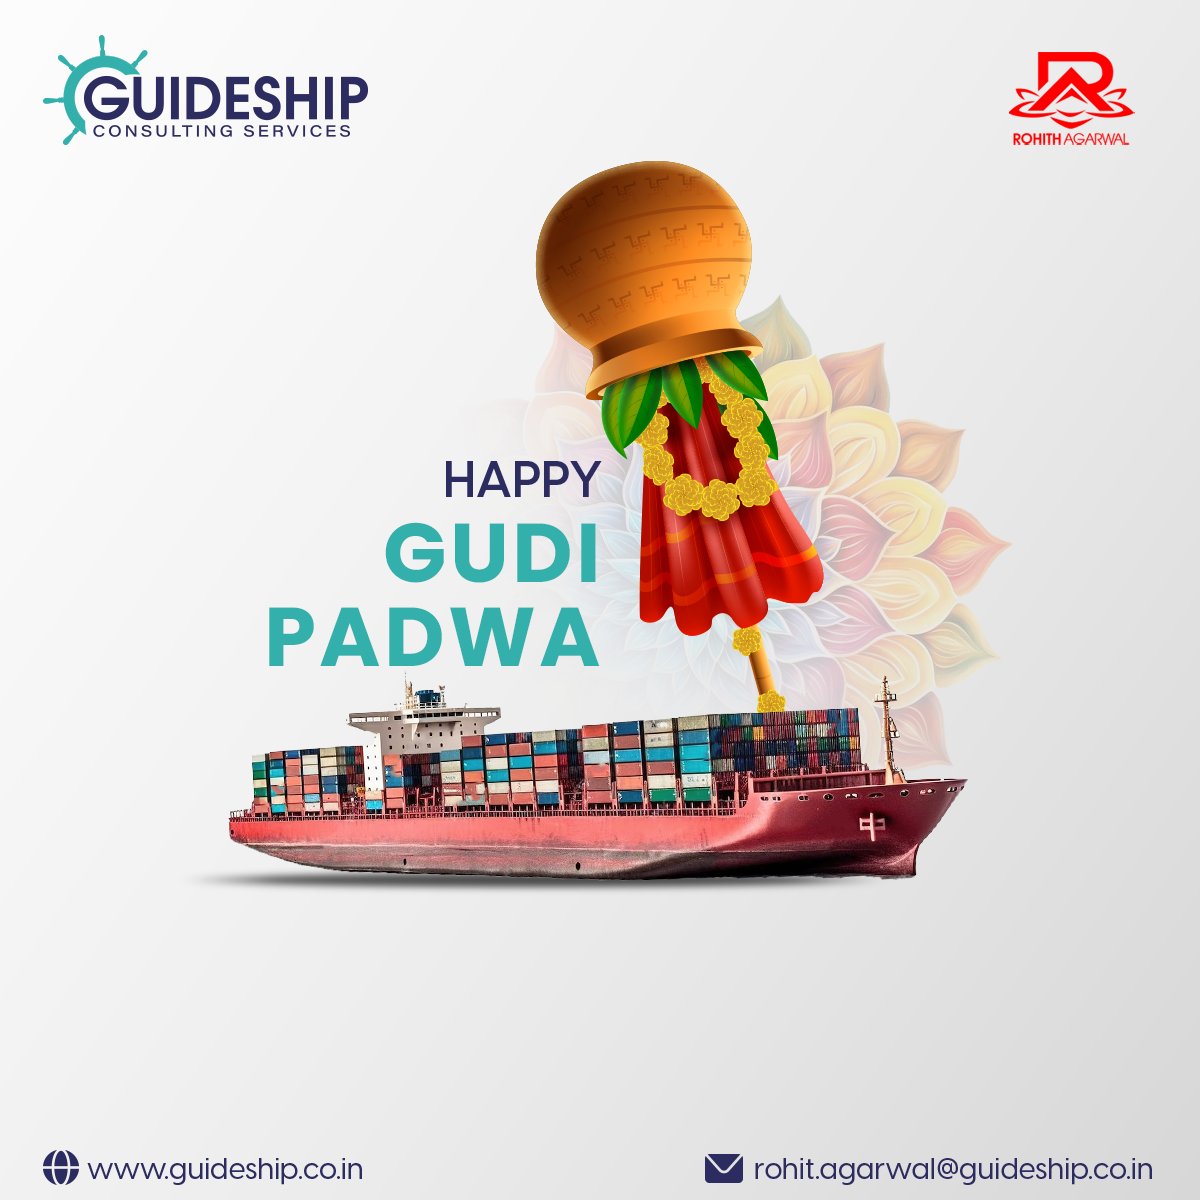 Happy Gudi Padwa from Guideship! May this new
beginning fill your life with joy, success, and prosperity. Here's to a year of growth and happiness!
 #GudiPadwa #NewBeginnings #ProsperityAhead
#FestivalOfJoy #GuideshipCelebrates #NewYearWishes
#GudiPadwaGreetings #NewYearBlessings